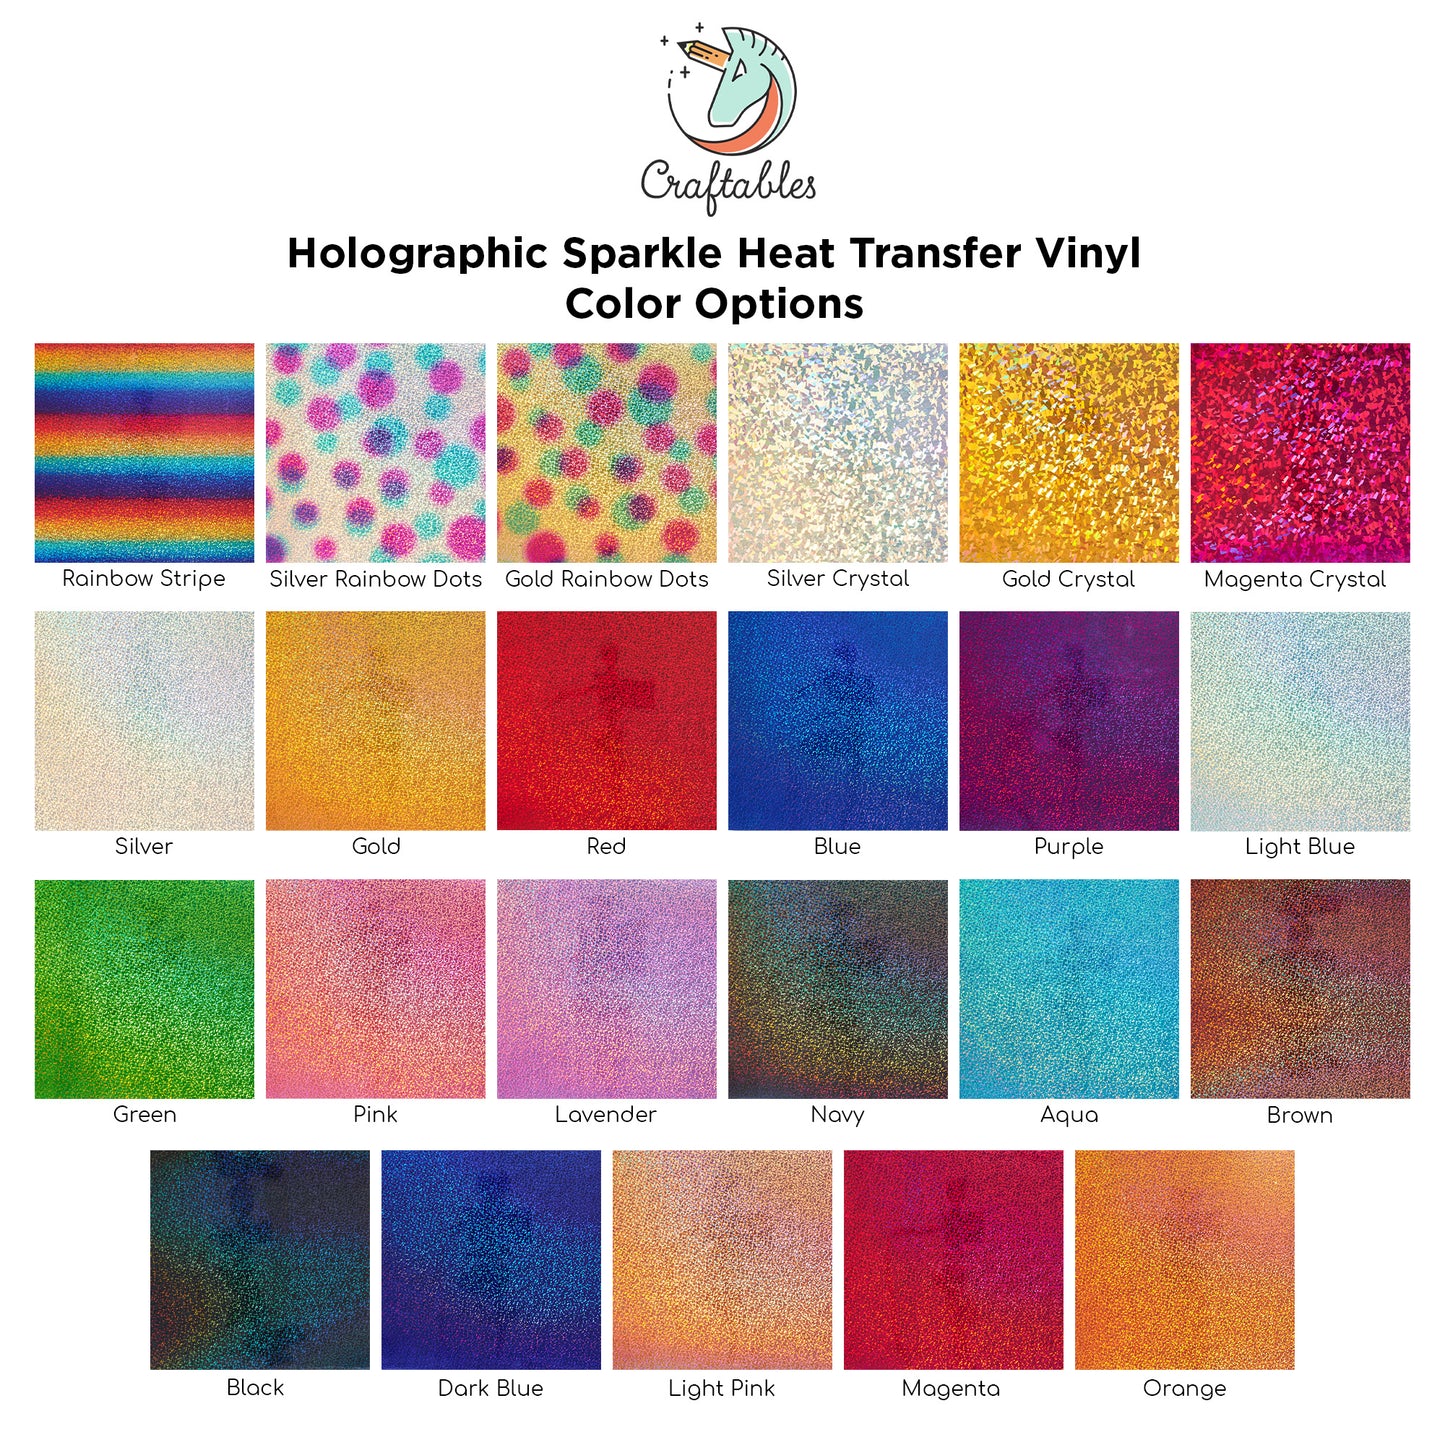 Magenta Holographic Sparkle Heat Transfer Vinyl Rolls By Craftables